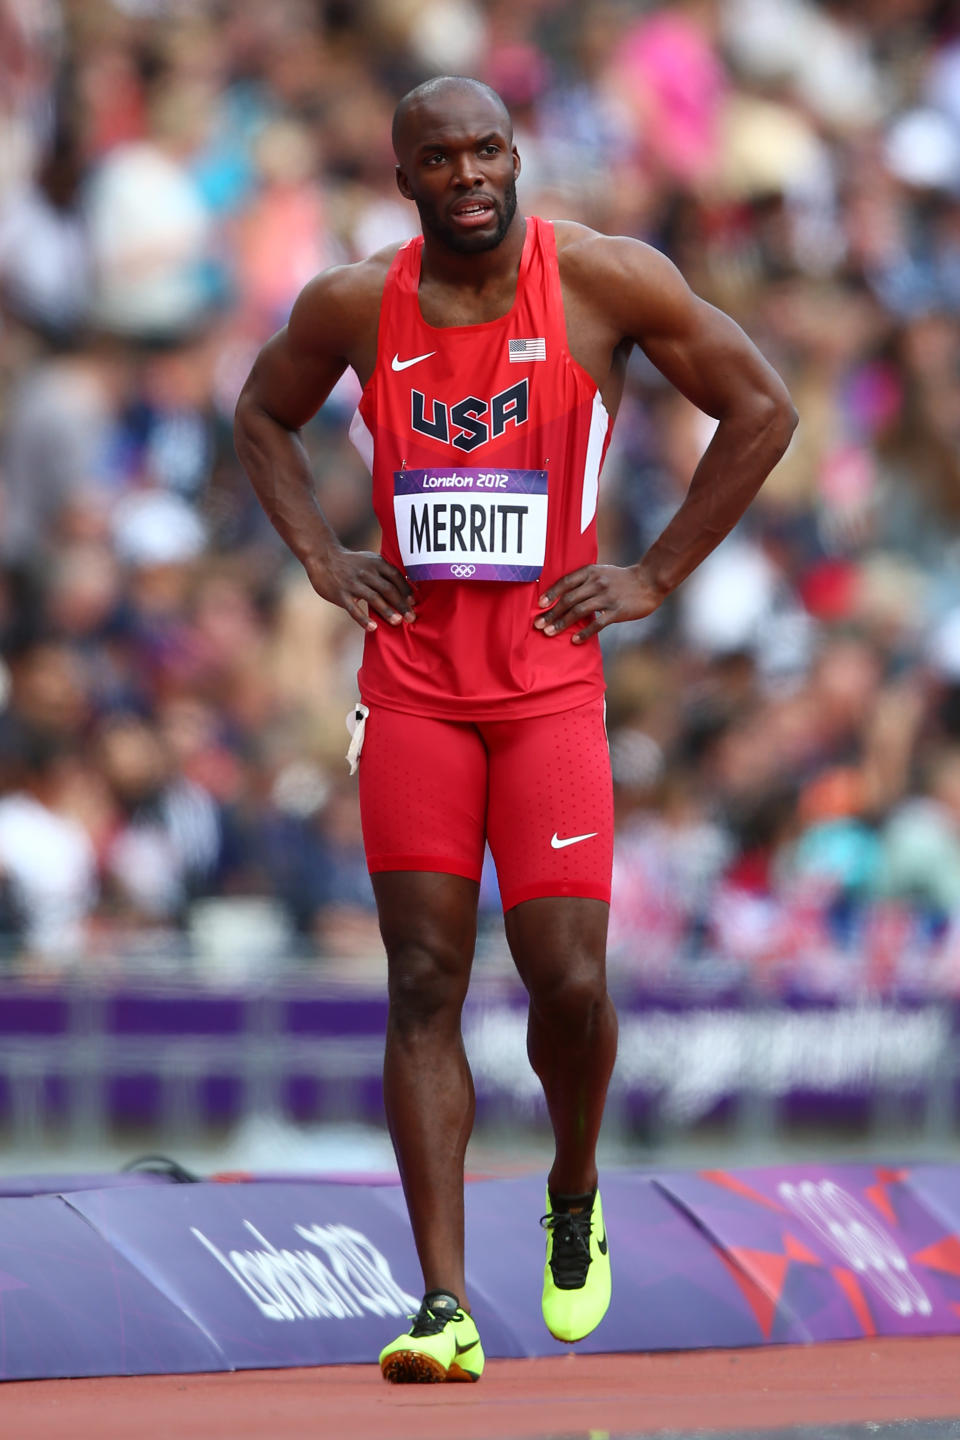 Lashawn Merritt of the United States pulls out with a hamstring injury in the Men's 400m Round 1 Heats on Day 8 of the London 2012 Olympic Games at Olympic Stadium on August 4, 2012 in London, England. (Photo by Michael Steele/Getty Images)